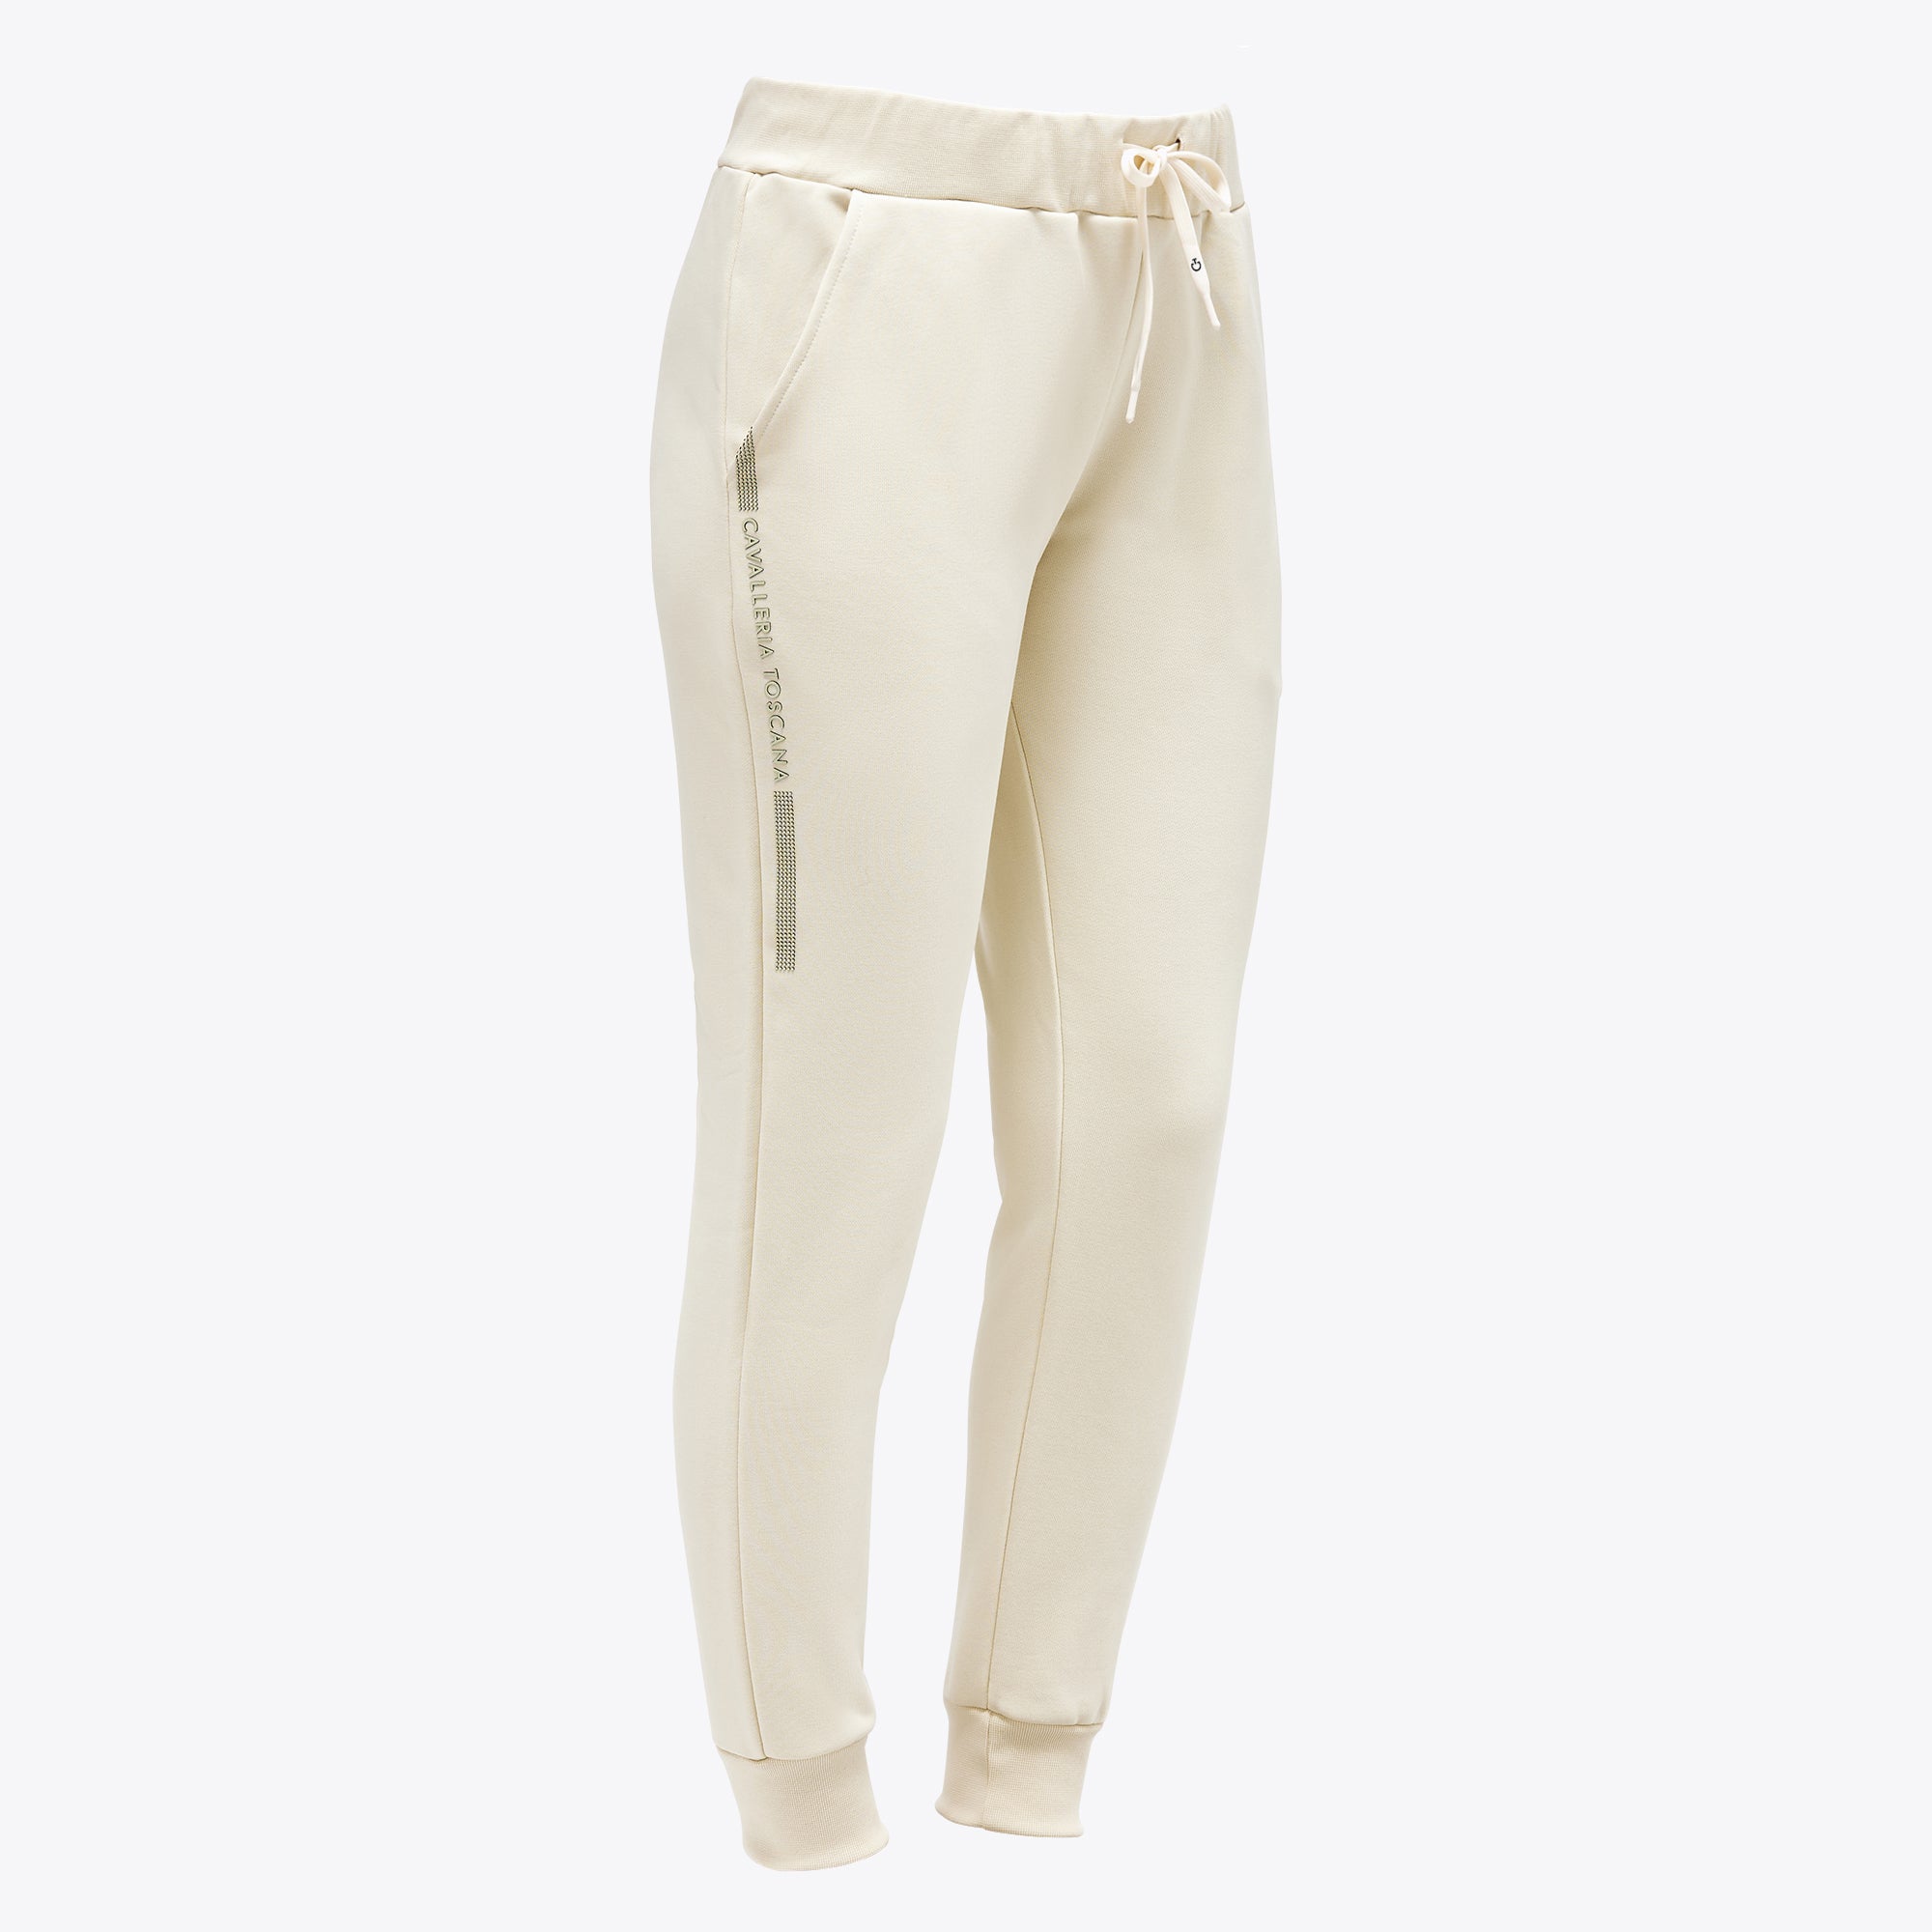 Cavalleria Toscana Jogginghose-Embossed Print Cotton Sweatpants BFD012-CO110-1B00-OffWhite